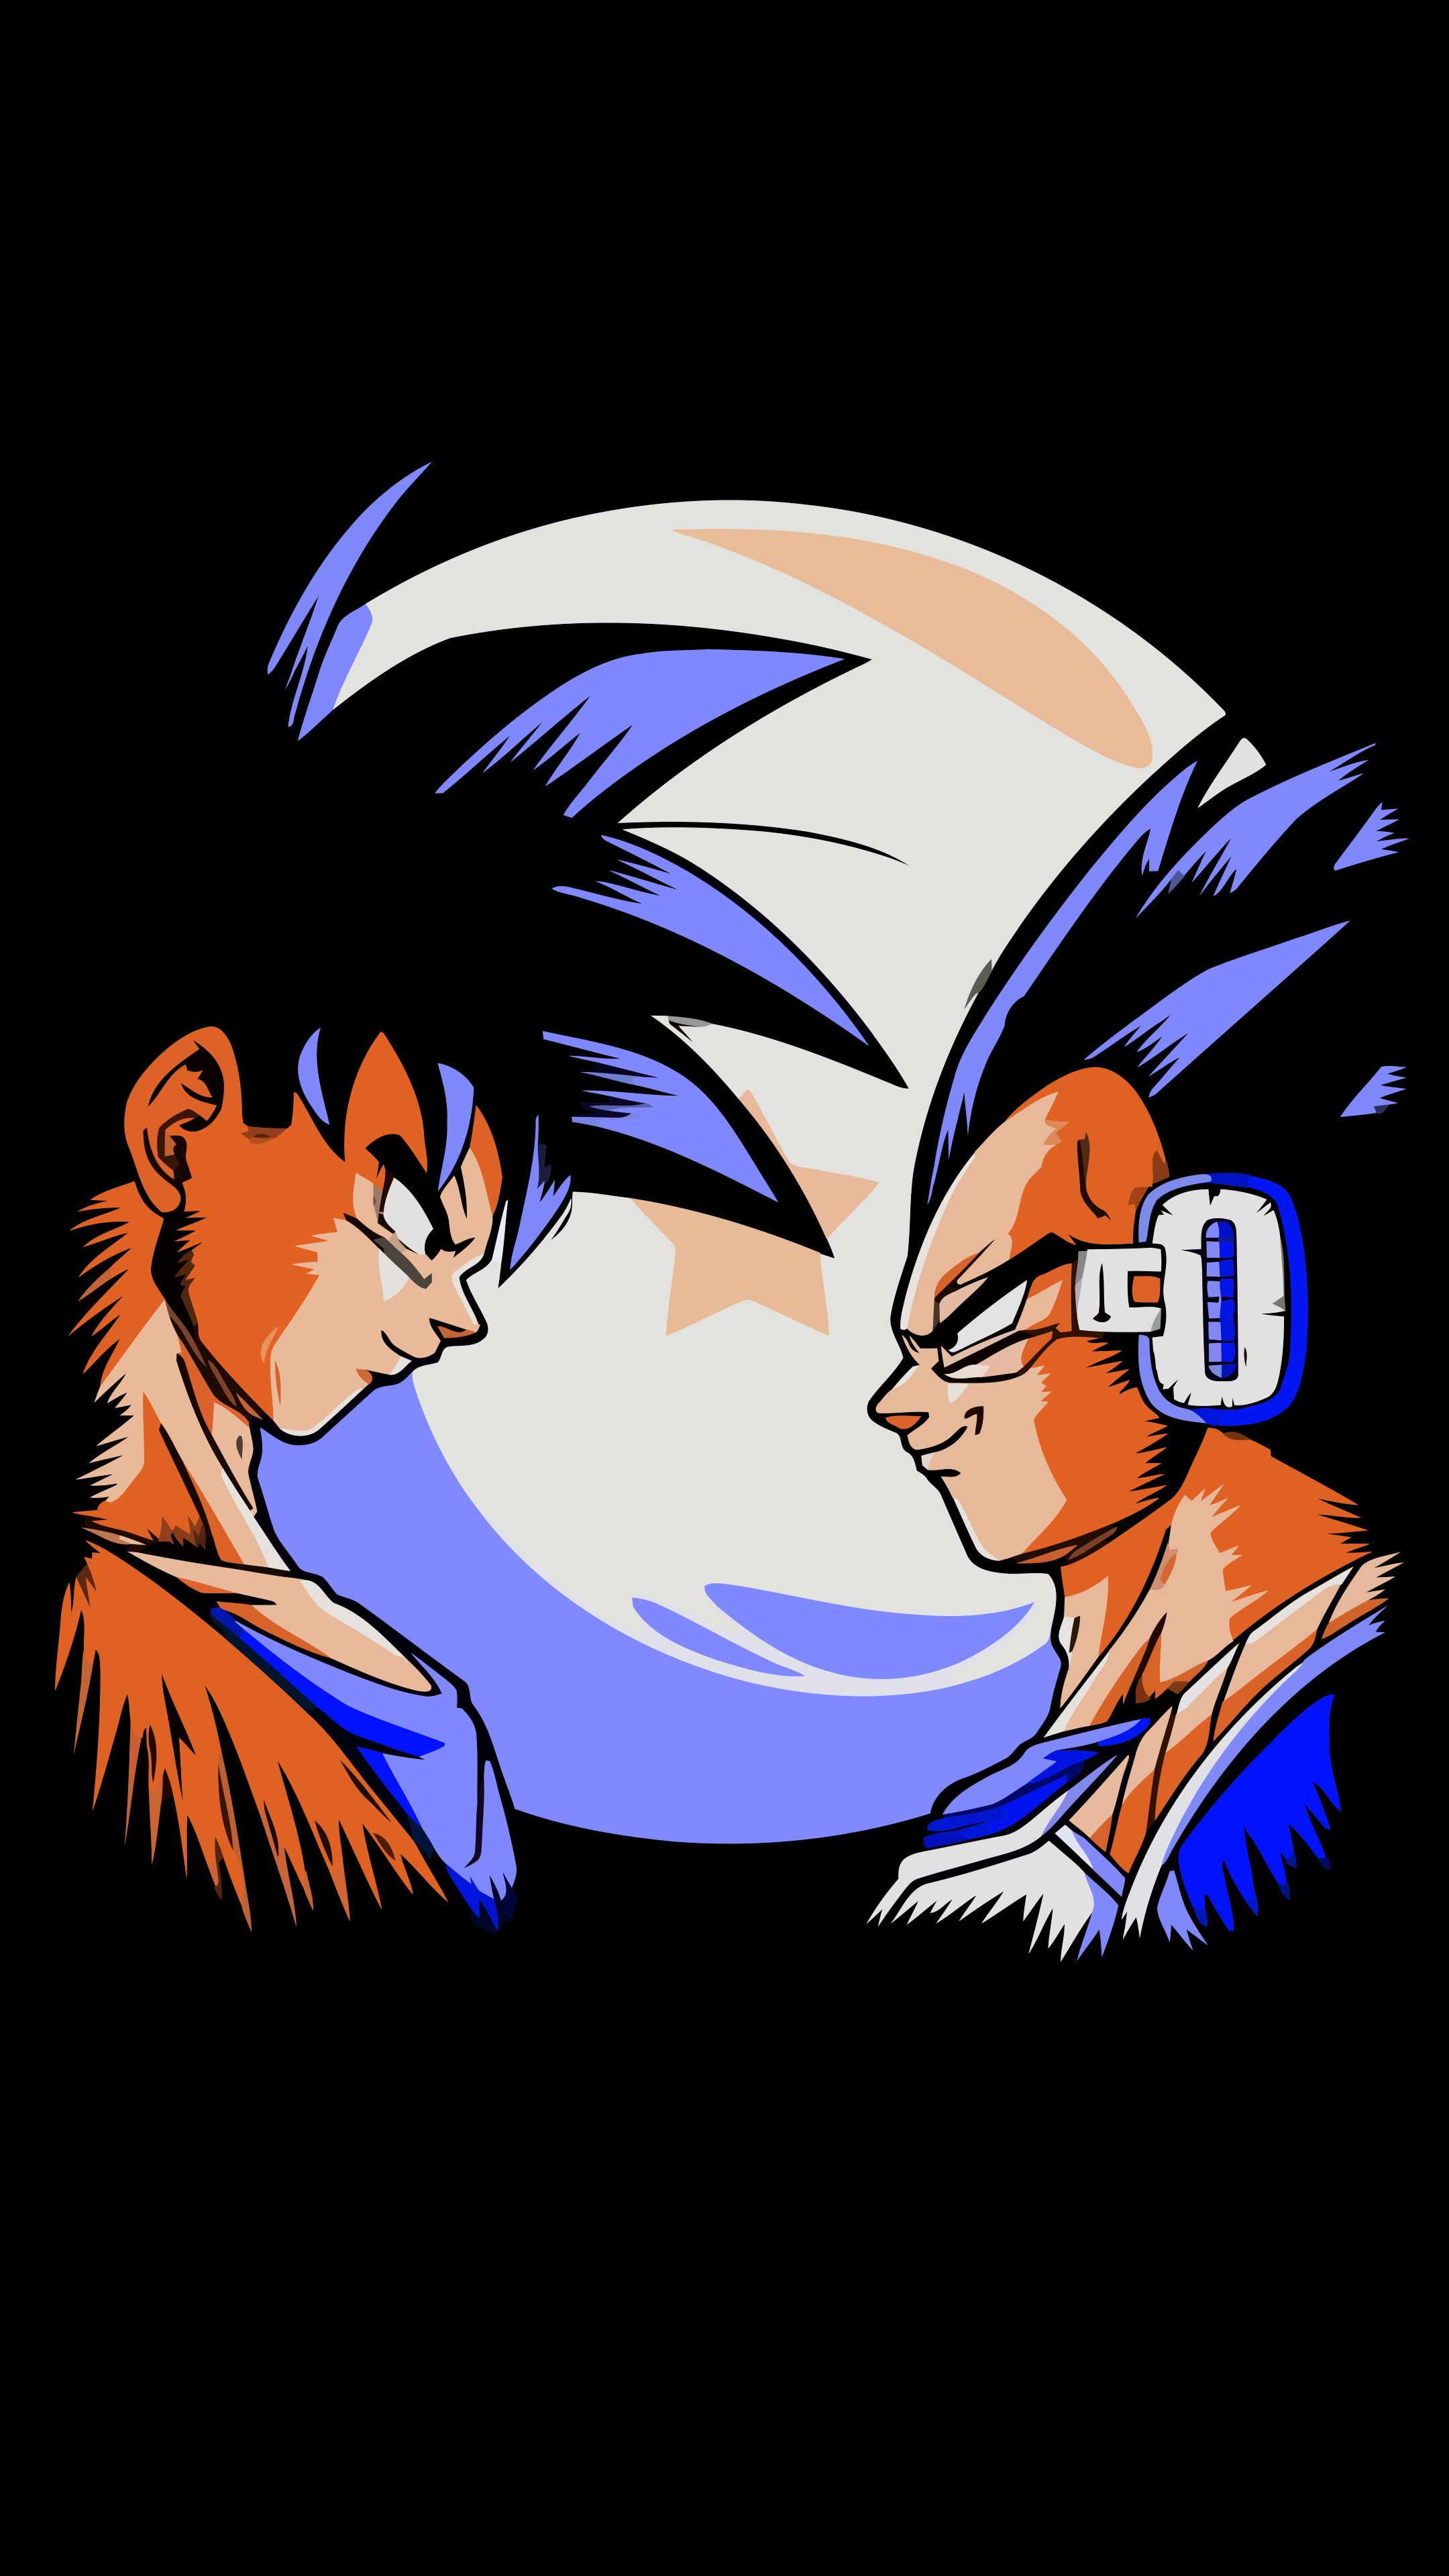 Dragon Ball Z Wallpaper for iPhone 11, Pro Max, X, 8, 7, 6 - Free Download  on 3Wallpapers